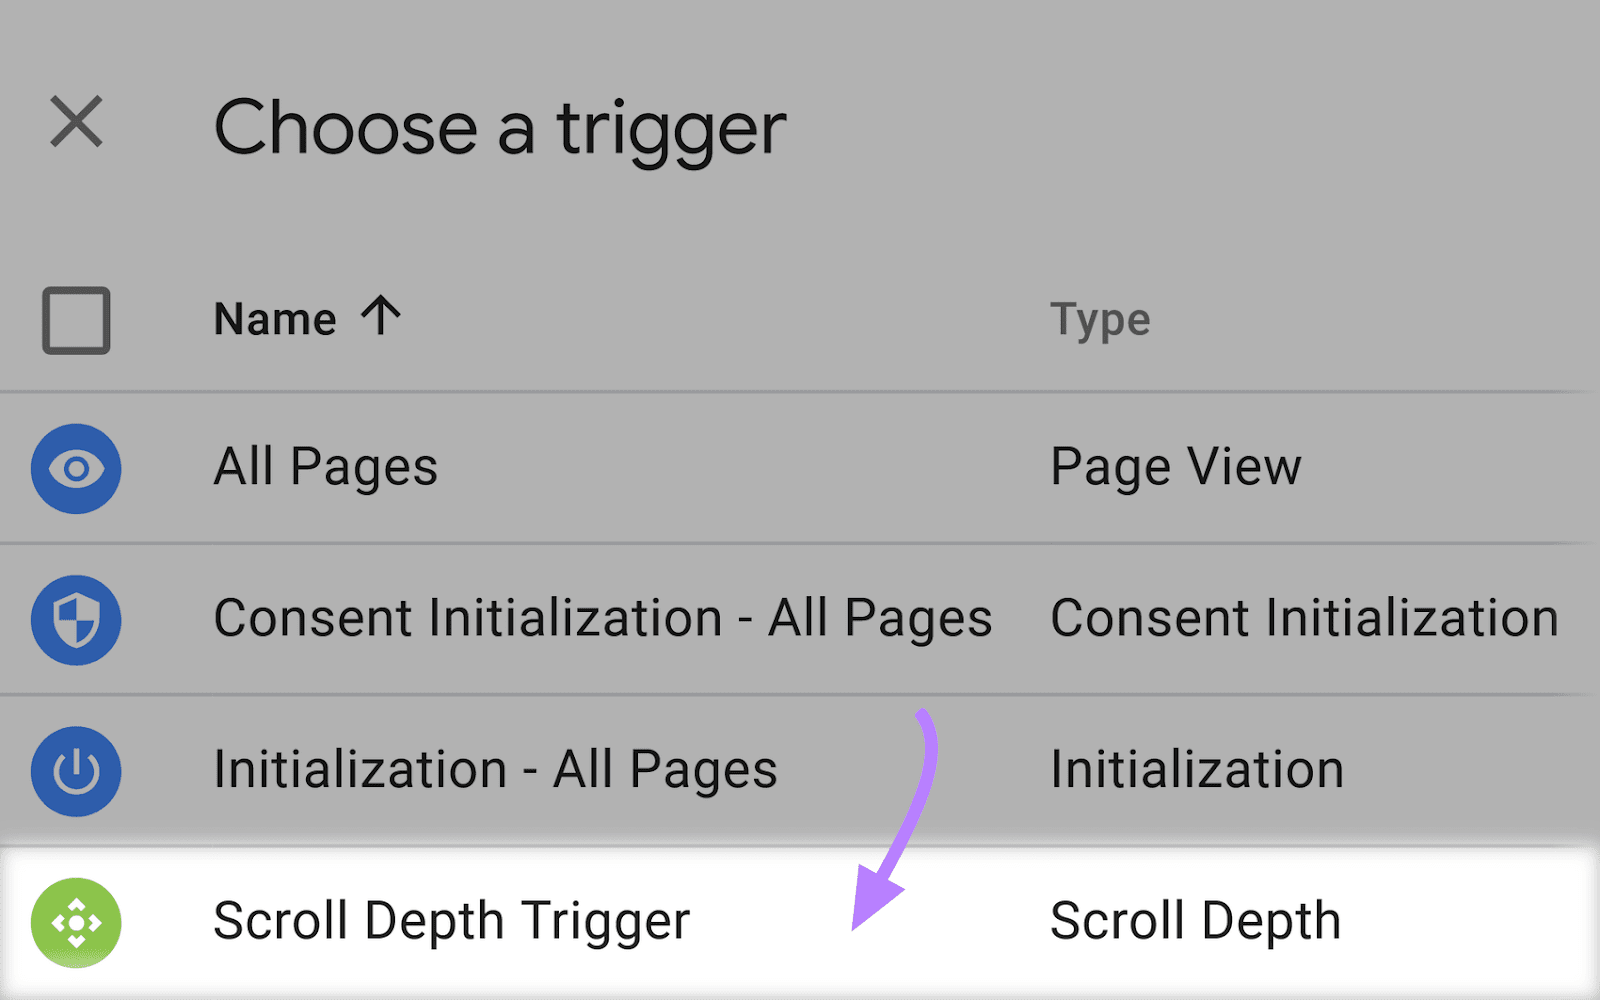 "Scroll Depth Trigger" selected nether  "Choose a trigger" window